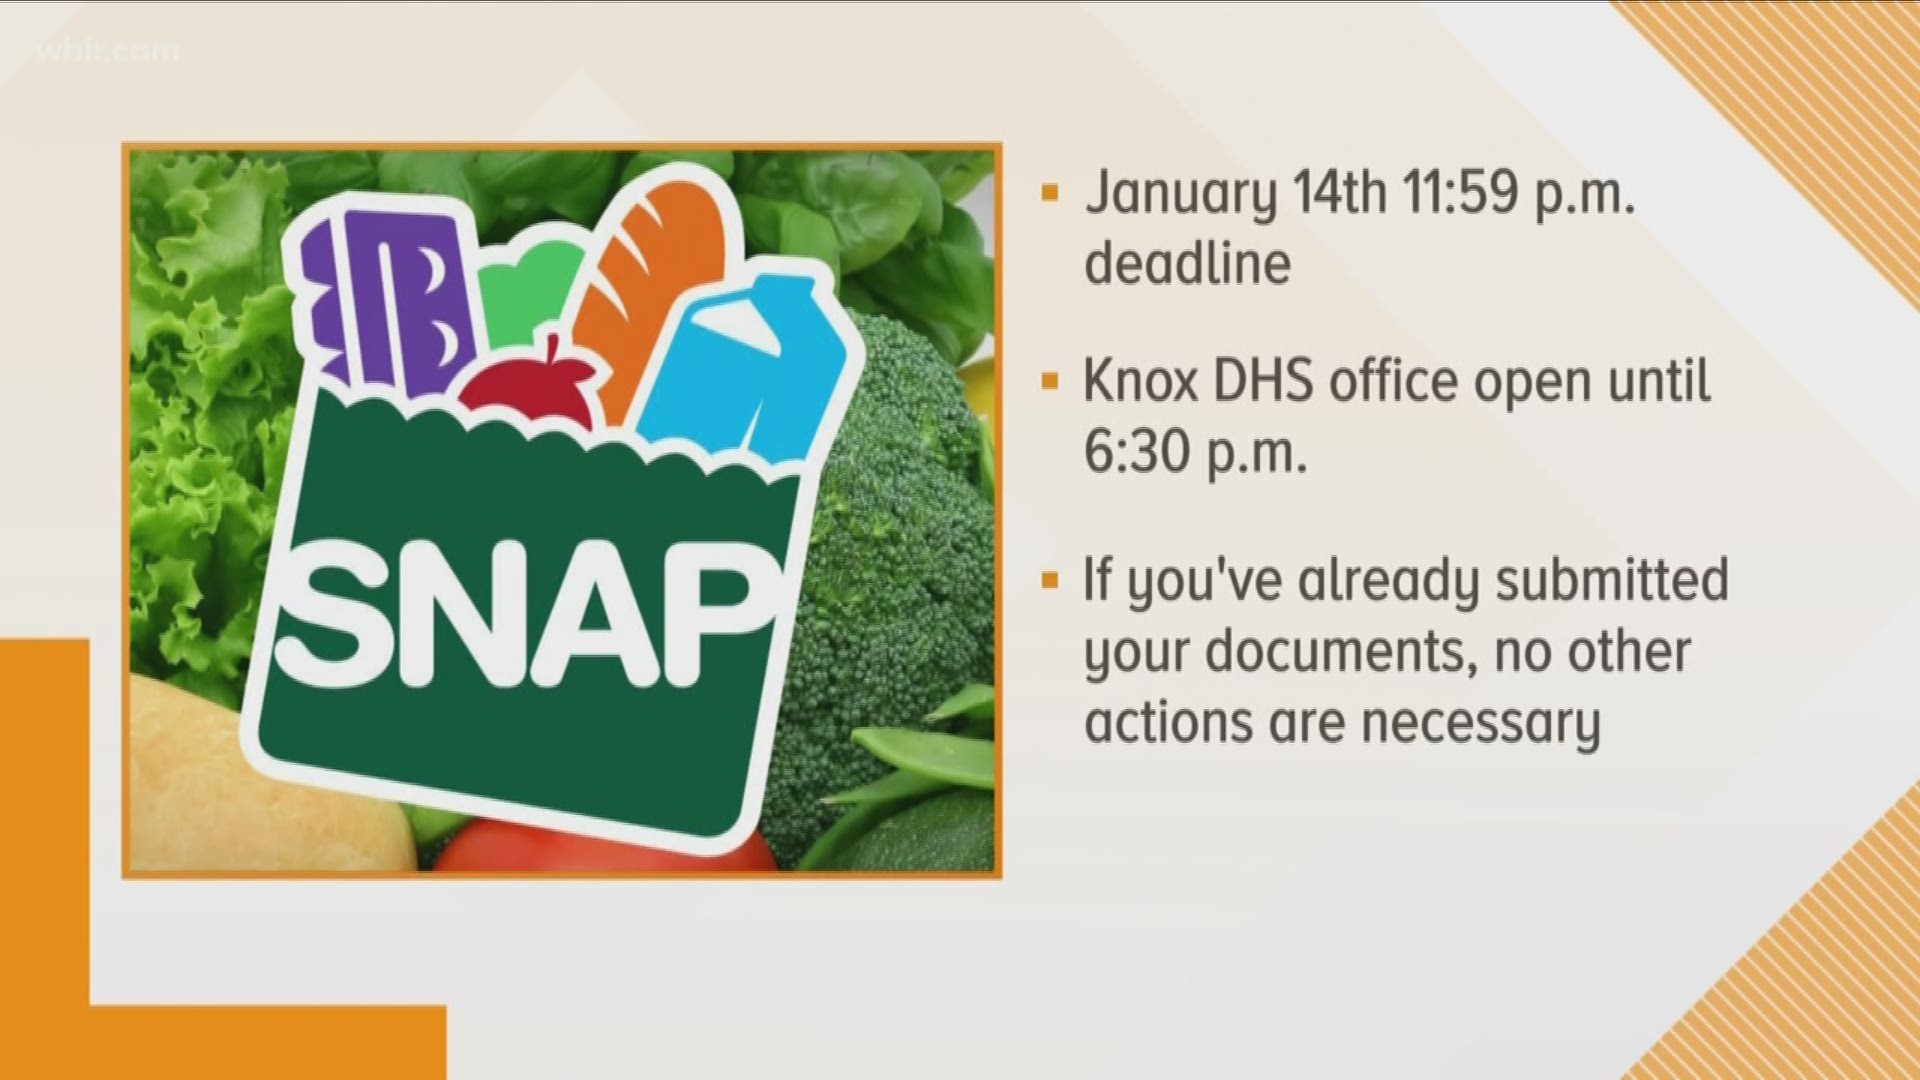 Families that are on the SNAP program will get their benefits if they file their paperwork by Monday's deadline.